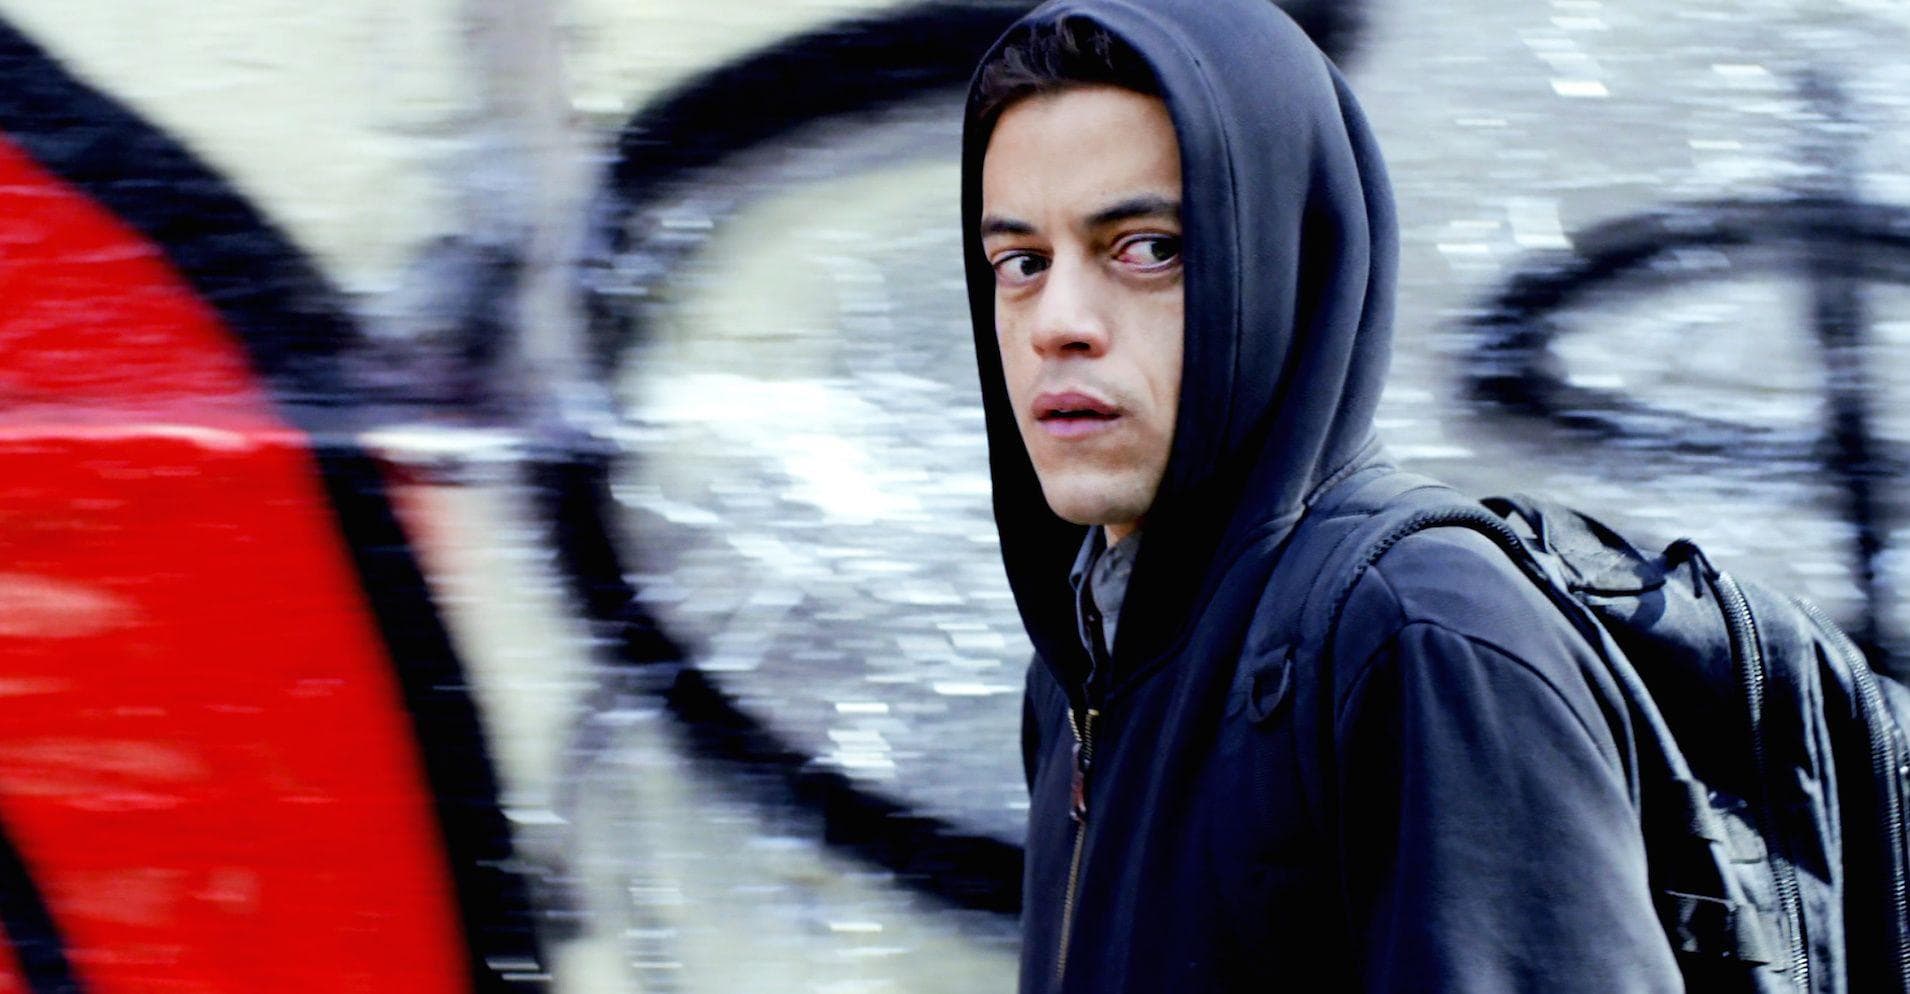 A QR code in last night's Mr. Robot leads to a mysterious website